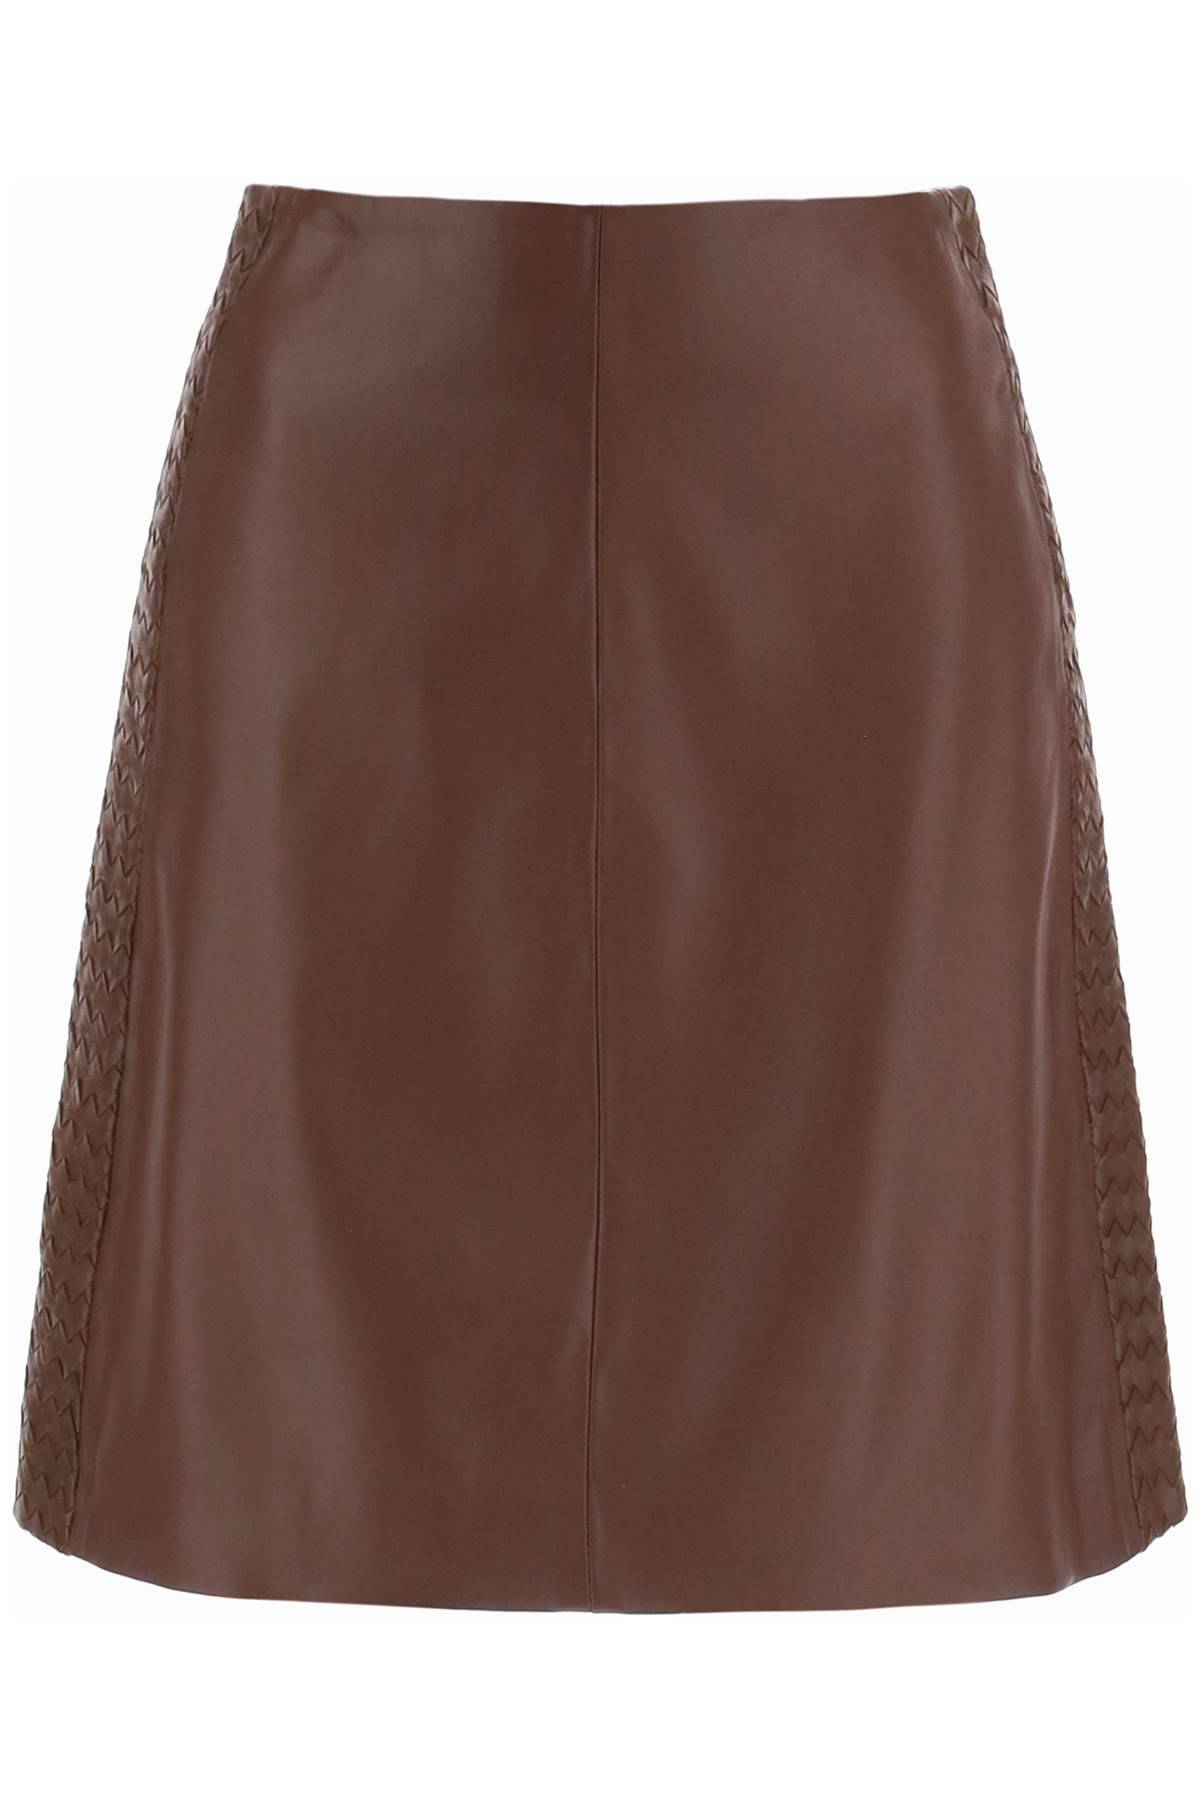 Weekend Max Mara WEEKEND MAX MARA ocra skirt in nappa leather with braided details